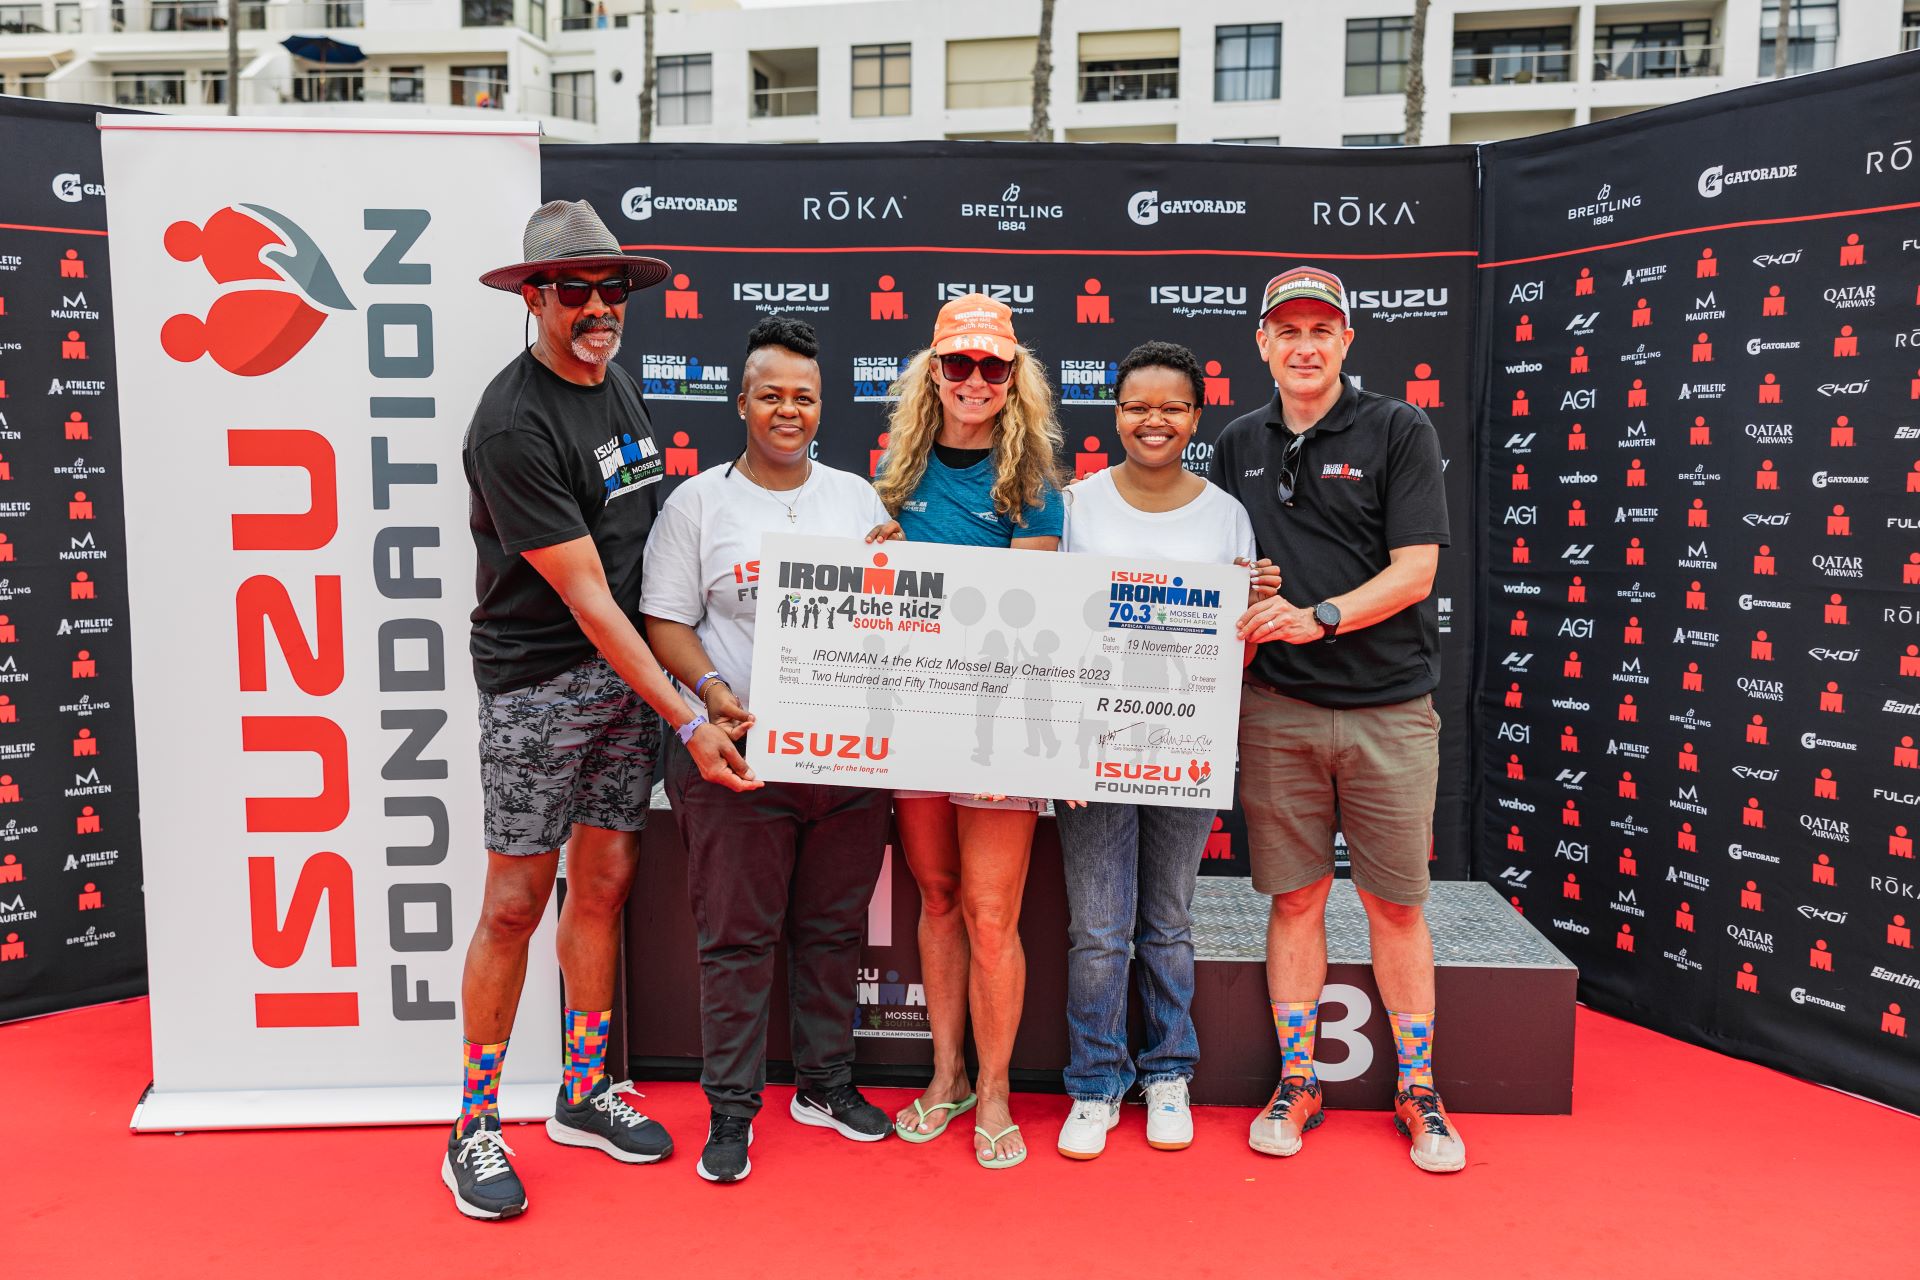 The ISUZU Foundation extends its reach to uplift charities in Mossel Bay